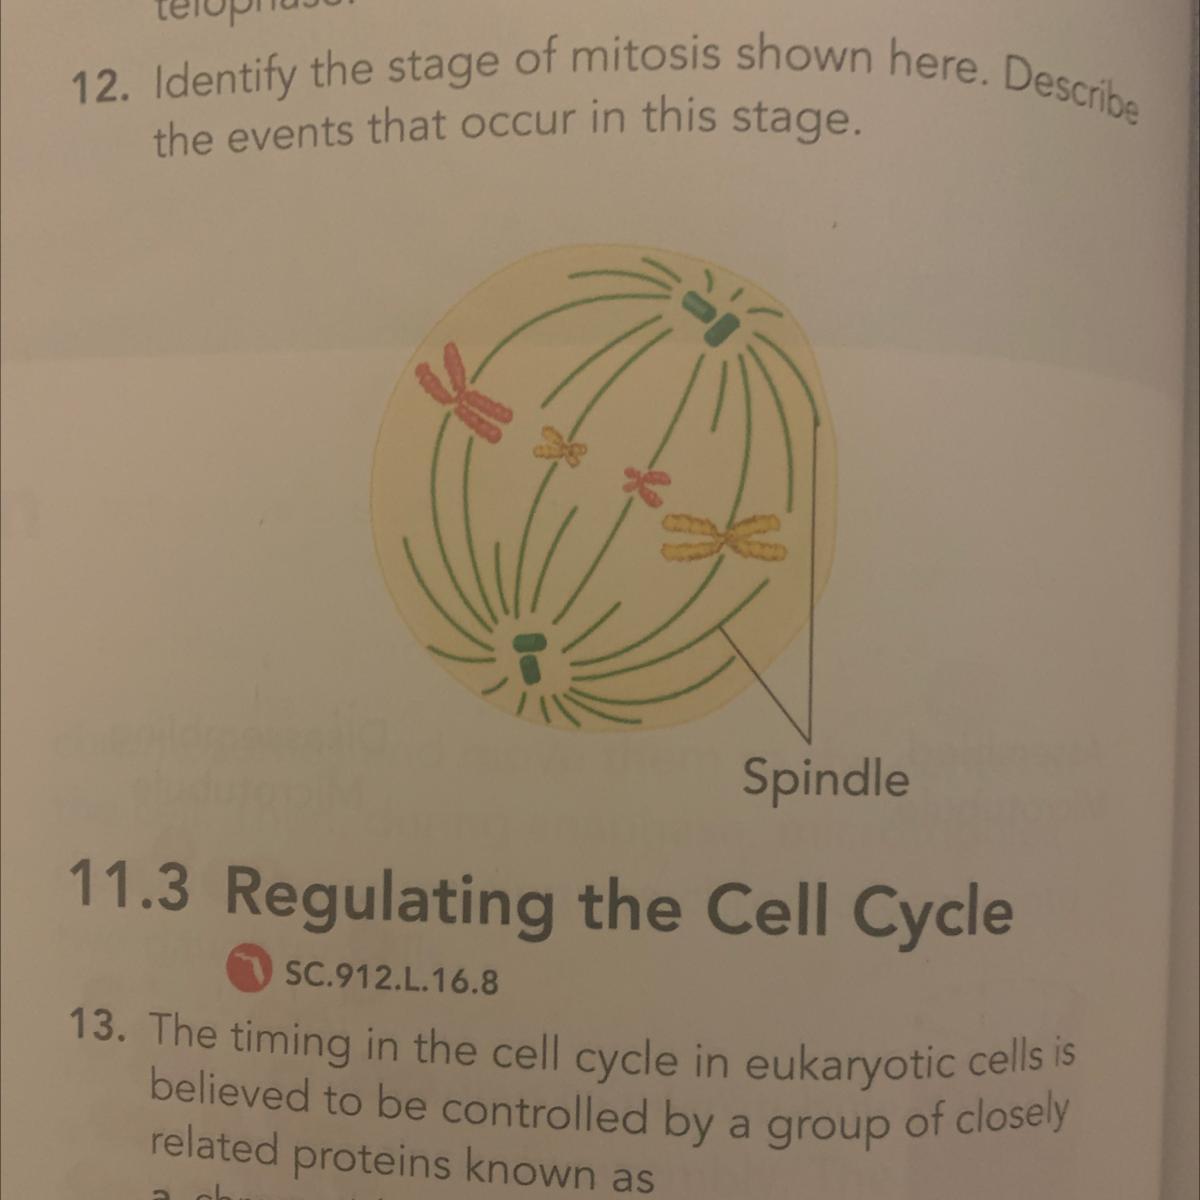 12. Identify The Stage Of Mitosis Shown Here. Describethe Events That Occur In This Stage.SpindleJUST